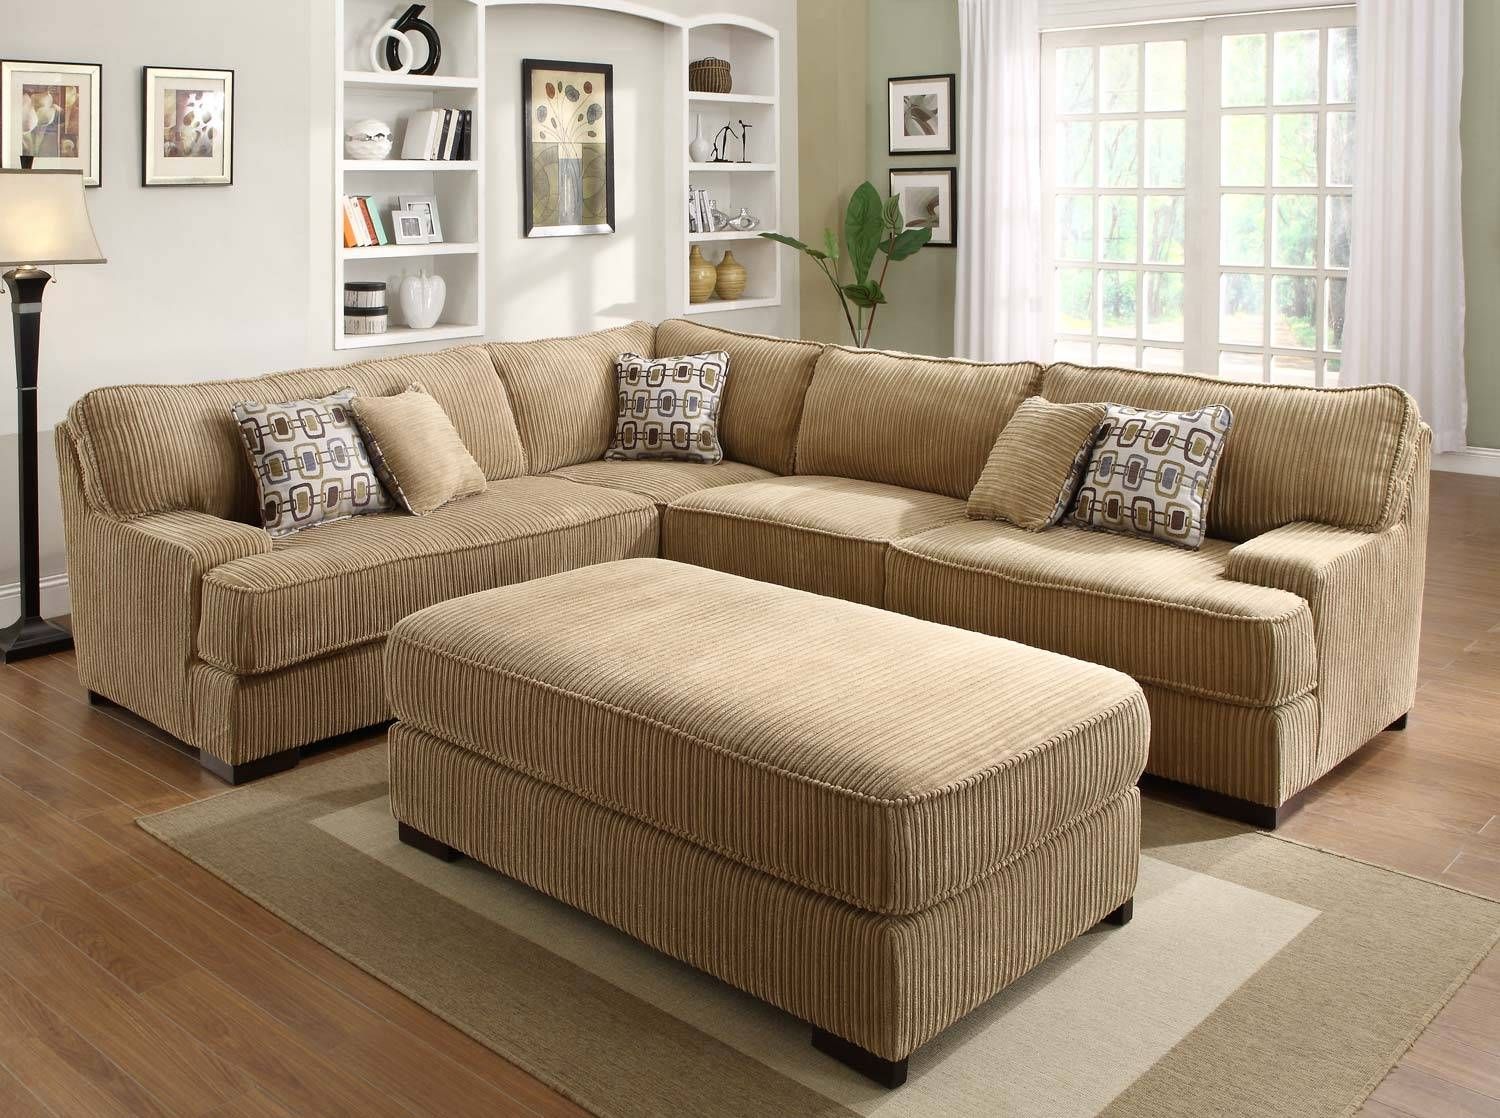 Oval Leather Sectional Sofas Modern Contemporary – S3net Within Oval Sofas (View 18 of 30)